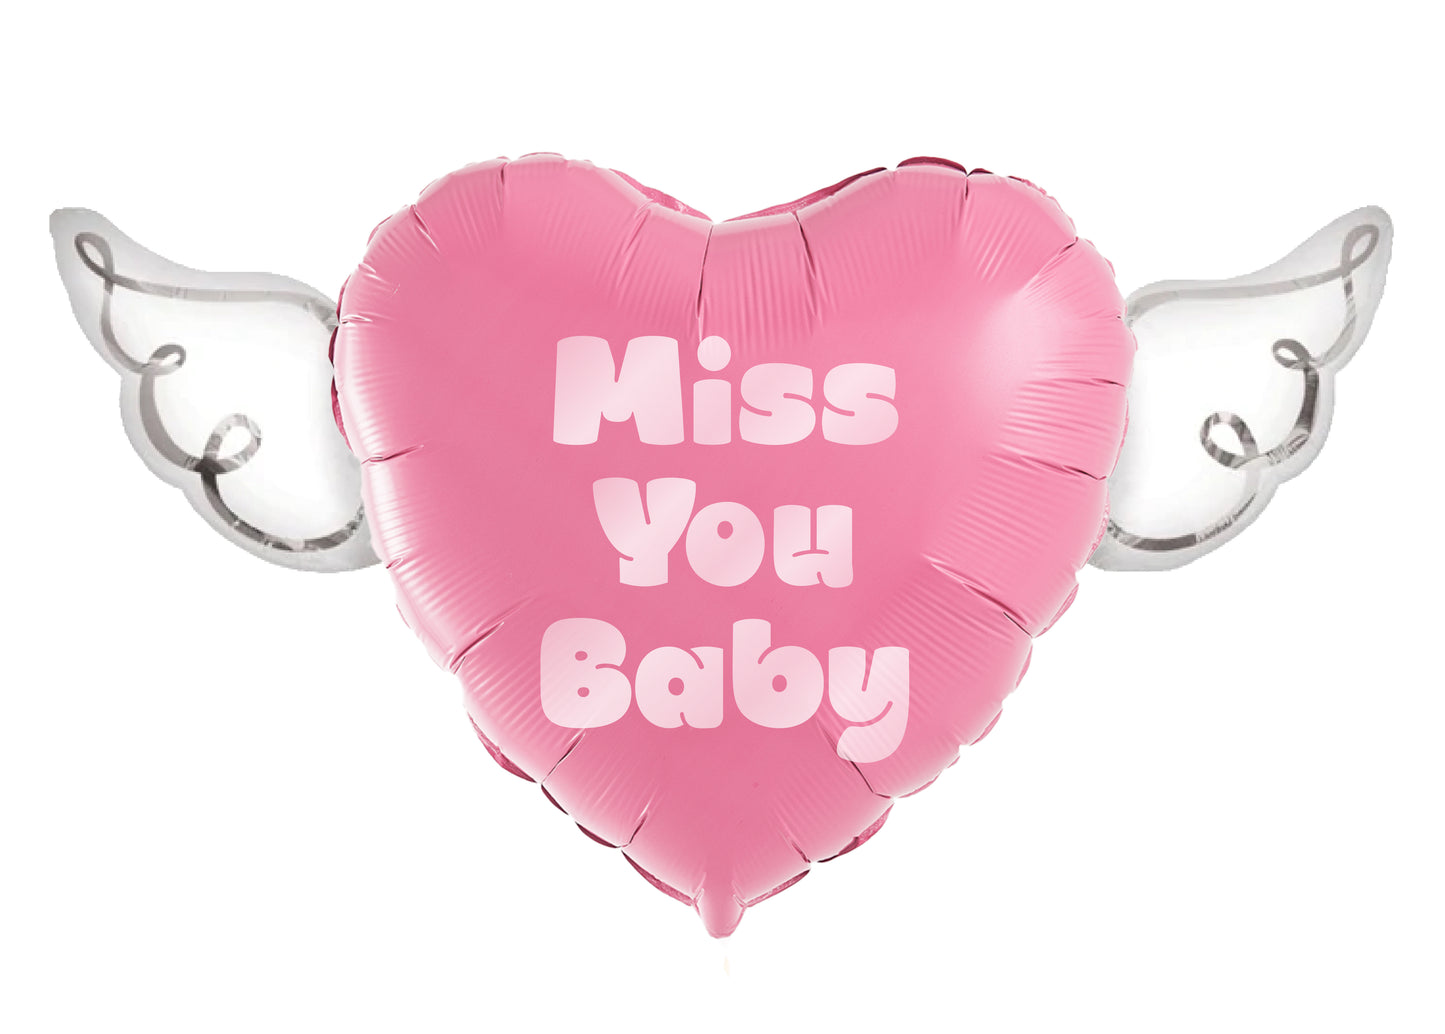 MISS YOU BABY Heavenly Balloons ® Heart Shaped with angel wings ...